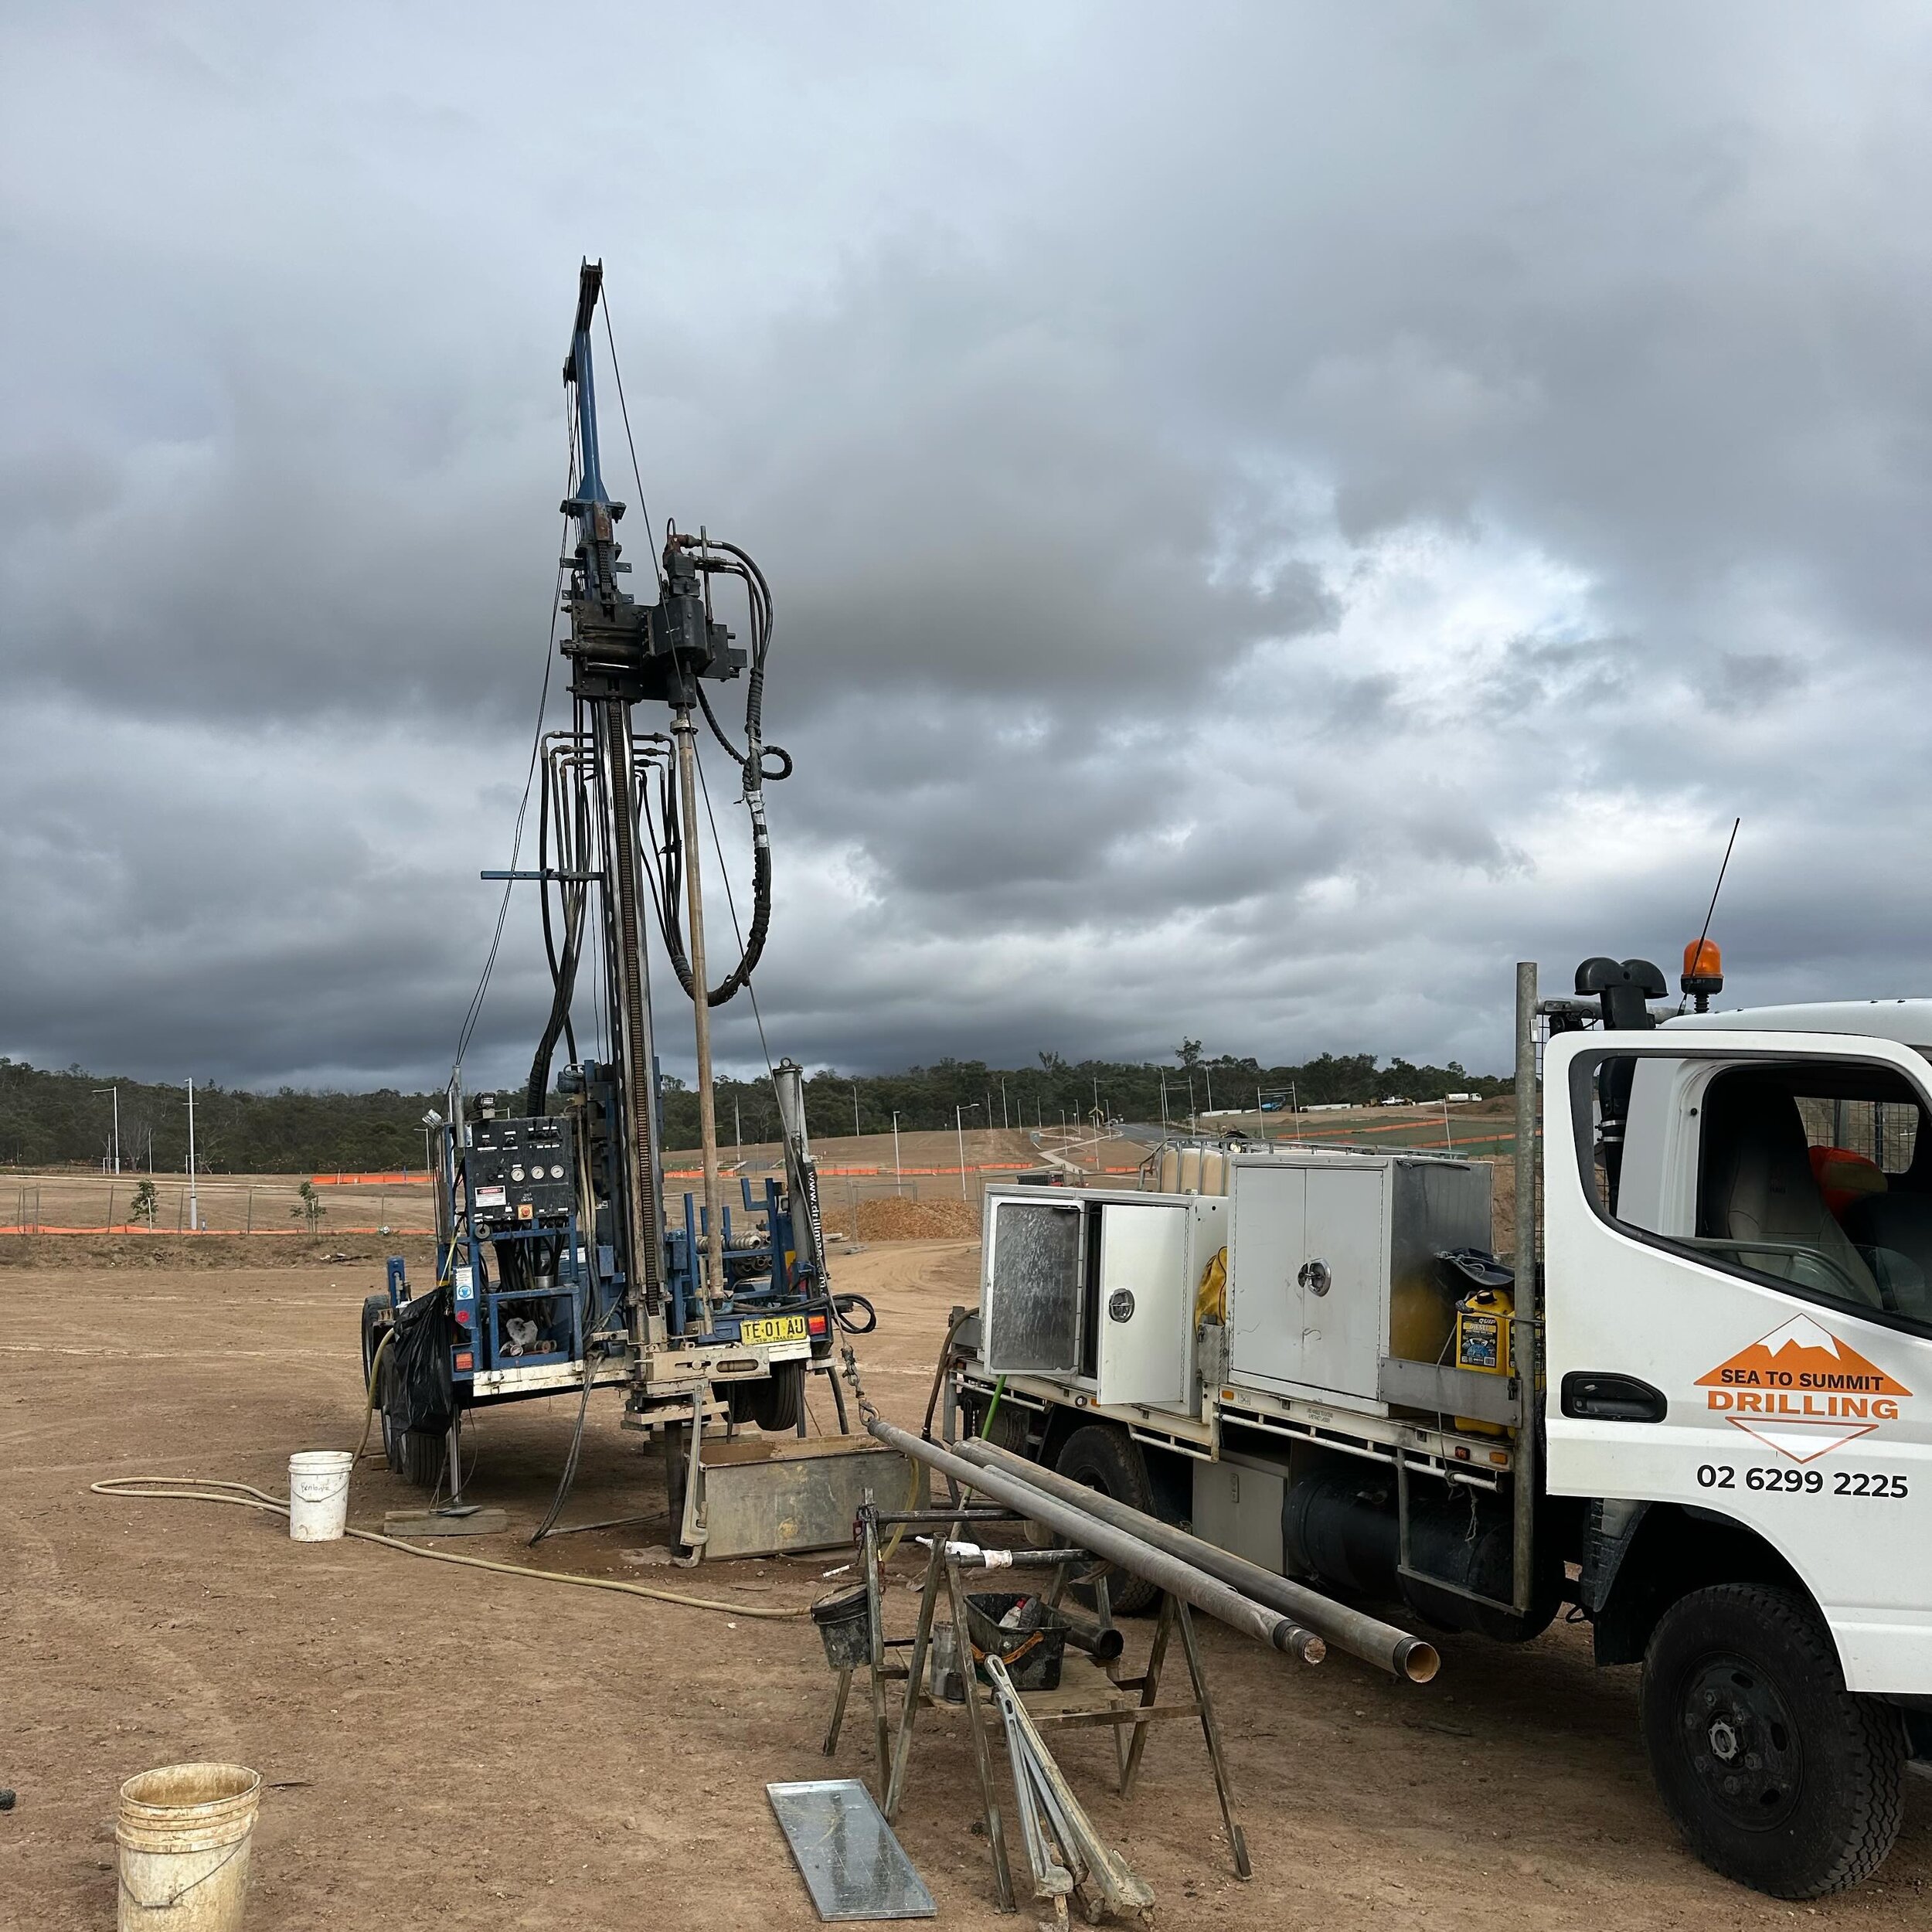 The boys working with the Trailer Mounted Rig in rain, hail or shine. Check out our website for the rig details 
https://www.seatosummitdrilling.com.au